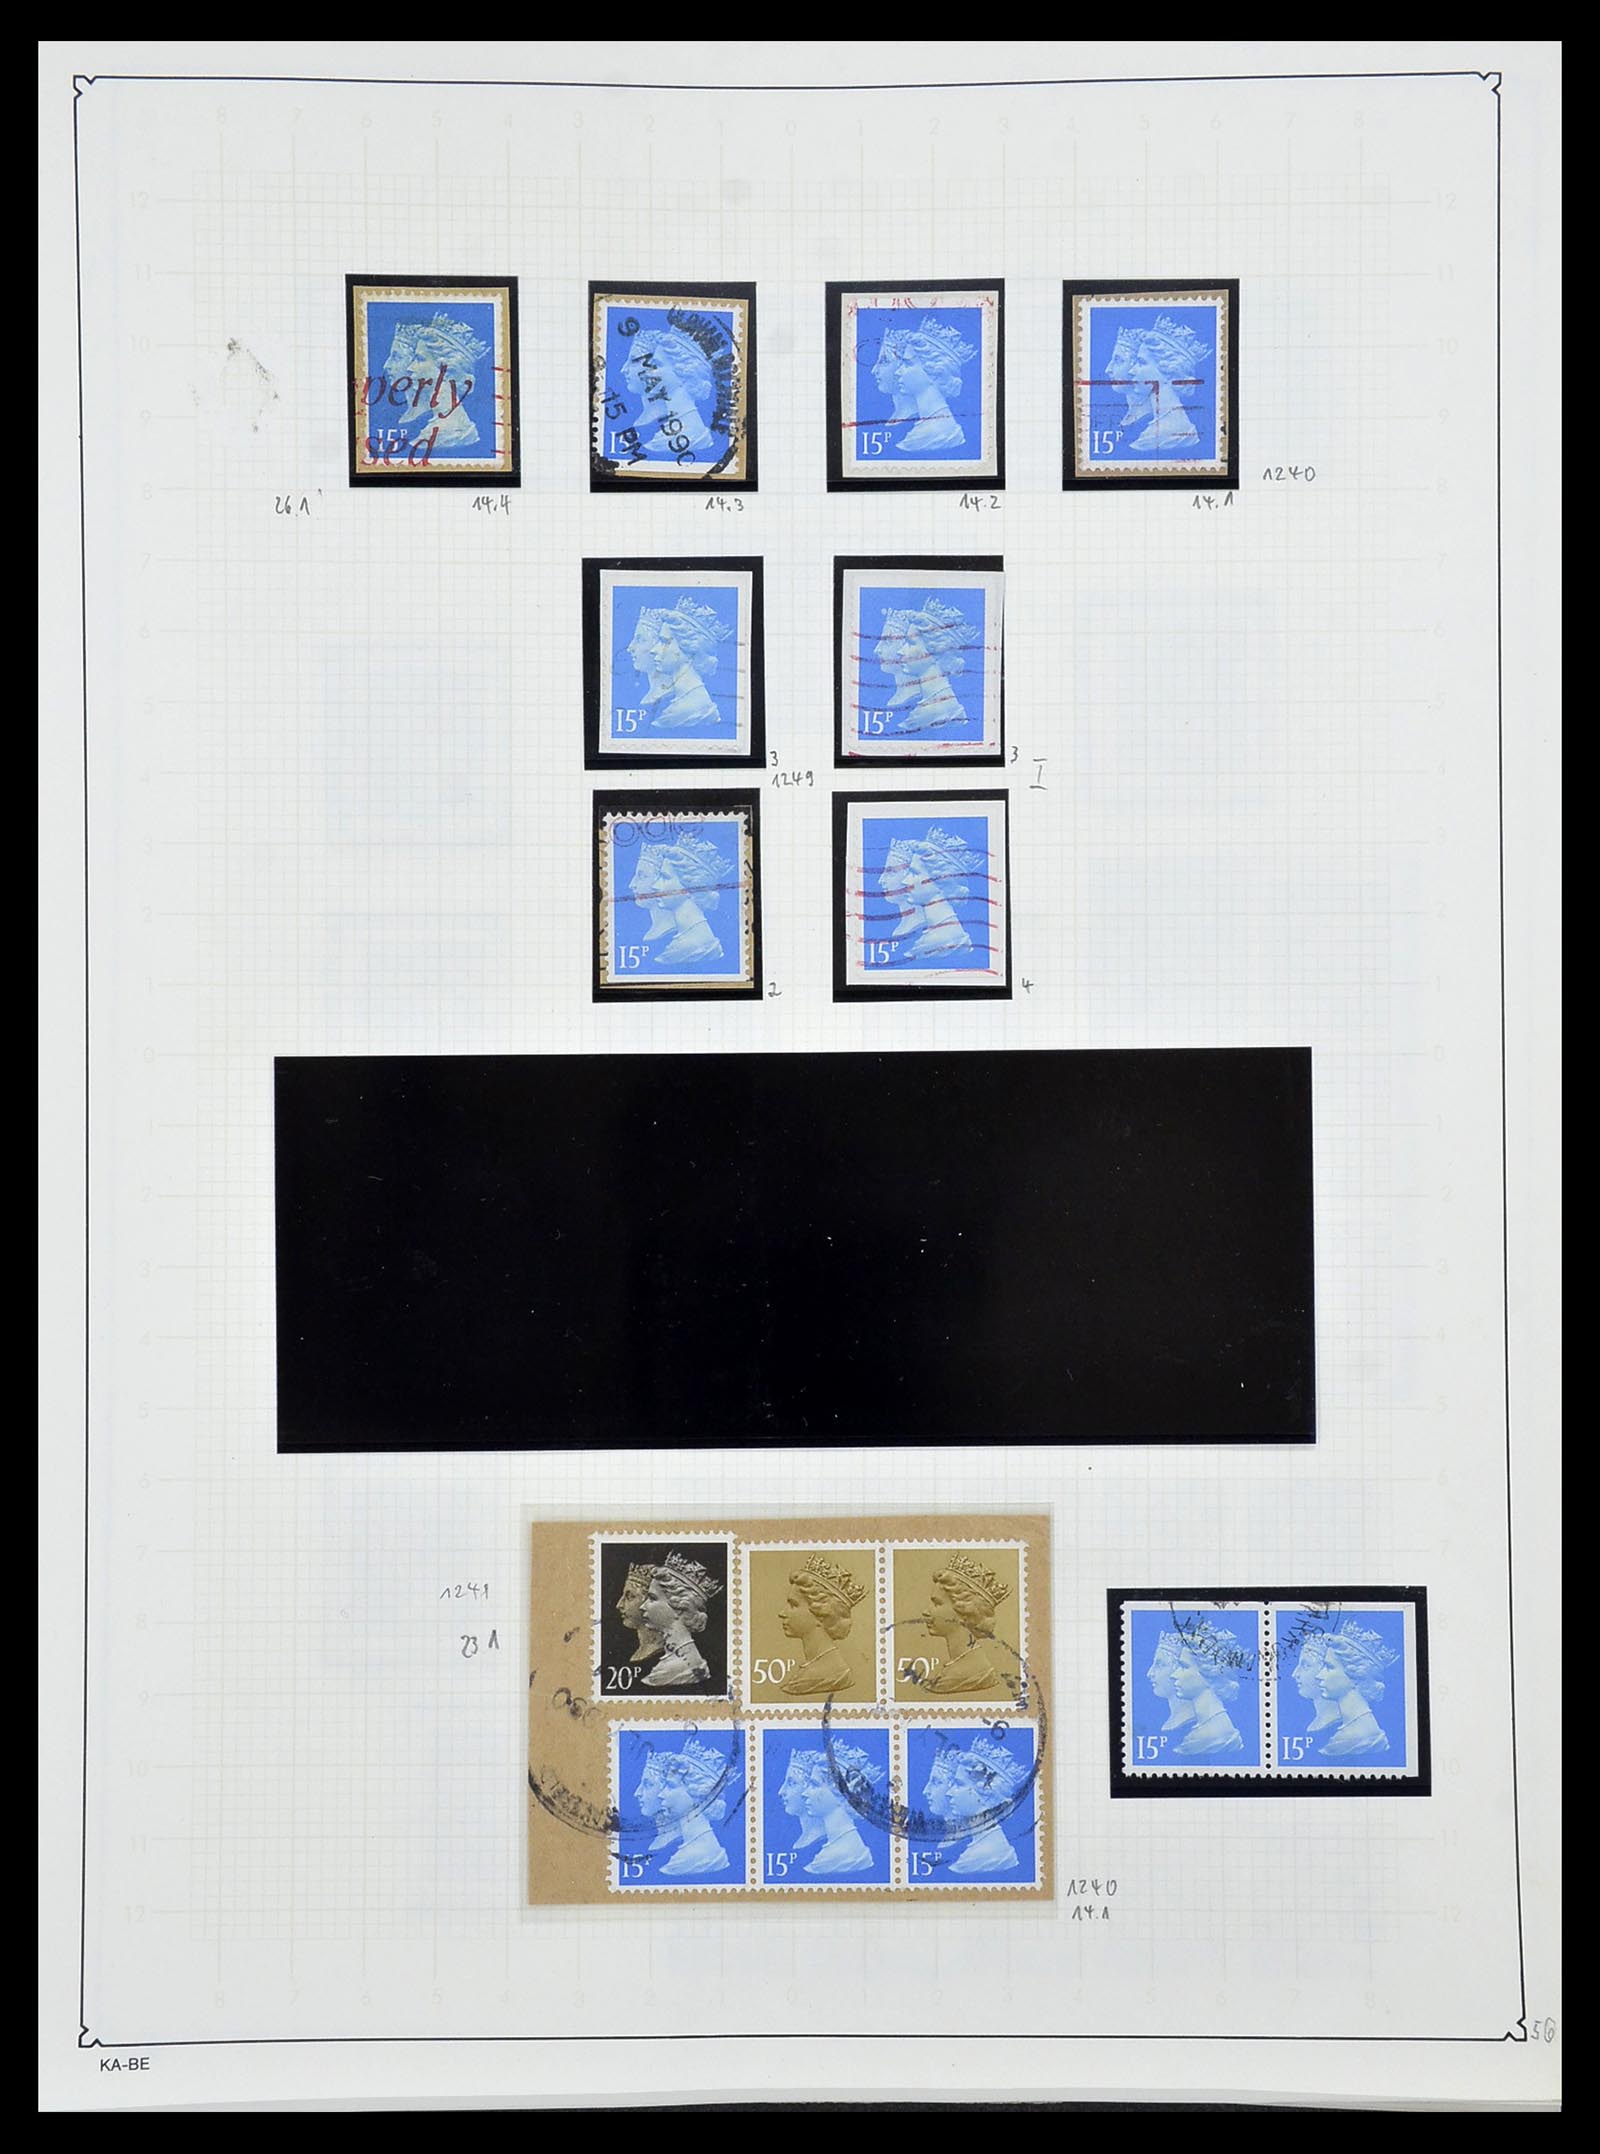 34221 064 - Stamp collection 34221 Great Britain Machins/castles 1971-2005.